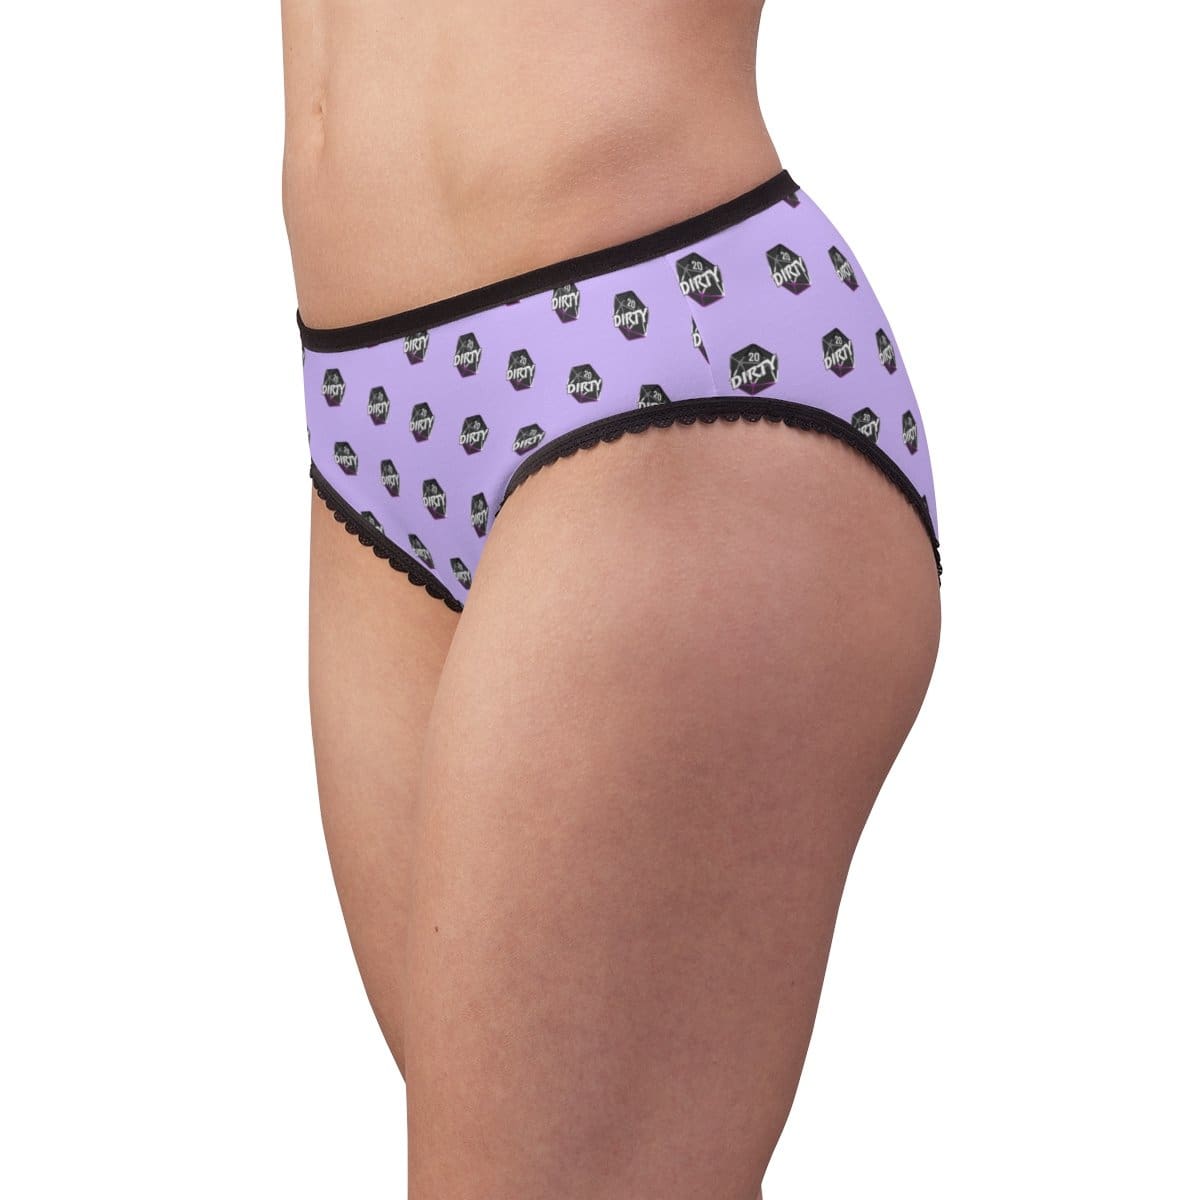 Dirty 20 Ace Pride Womens Briefs - All Over Prints